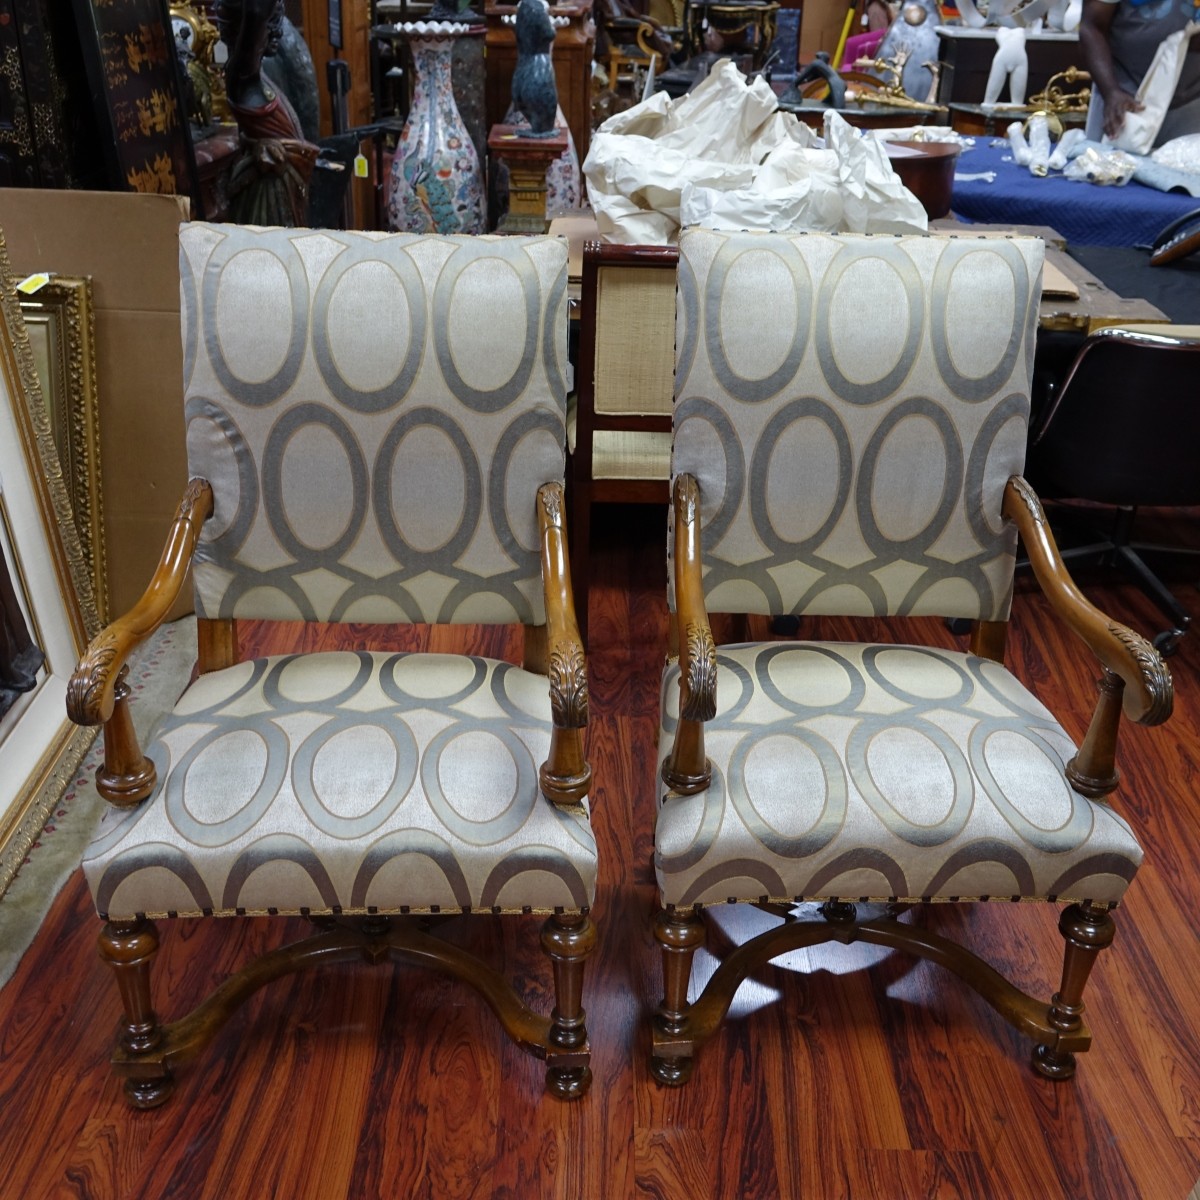 Pair of French Louis XIII Style Armchairs